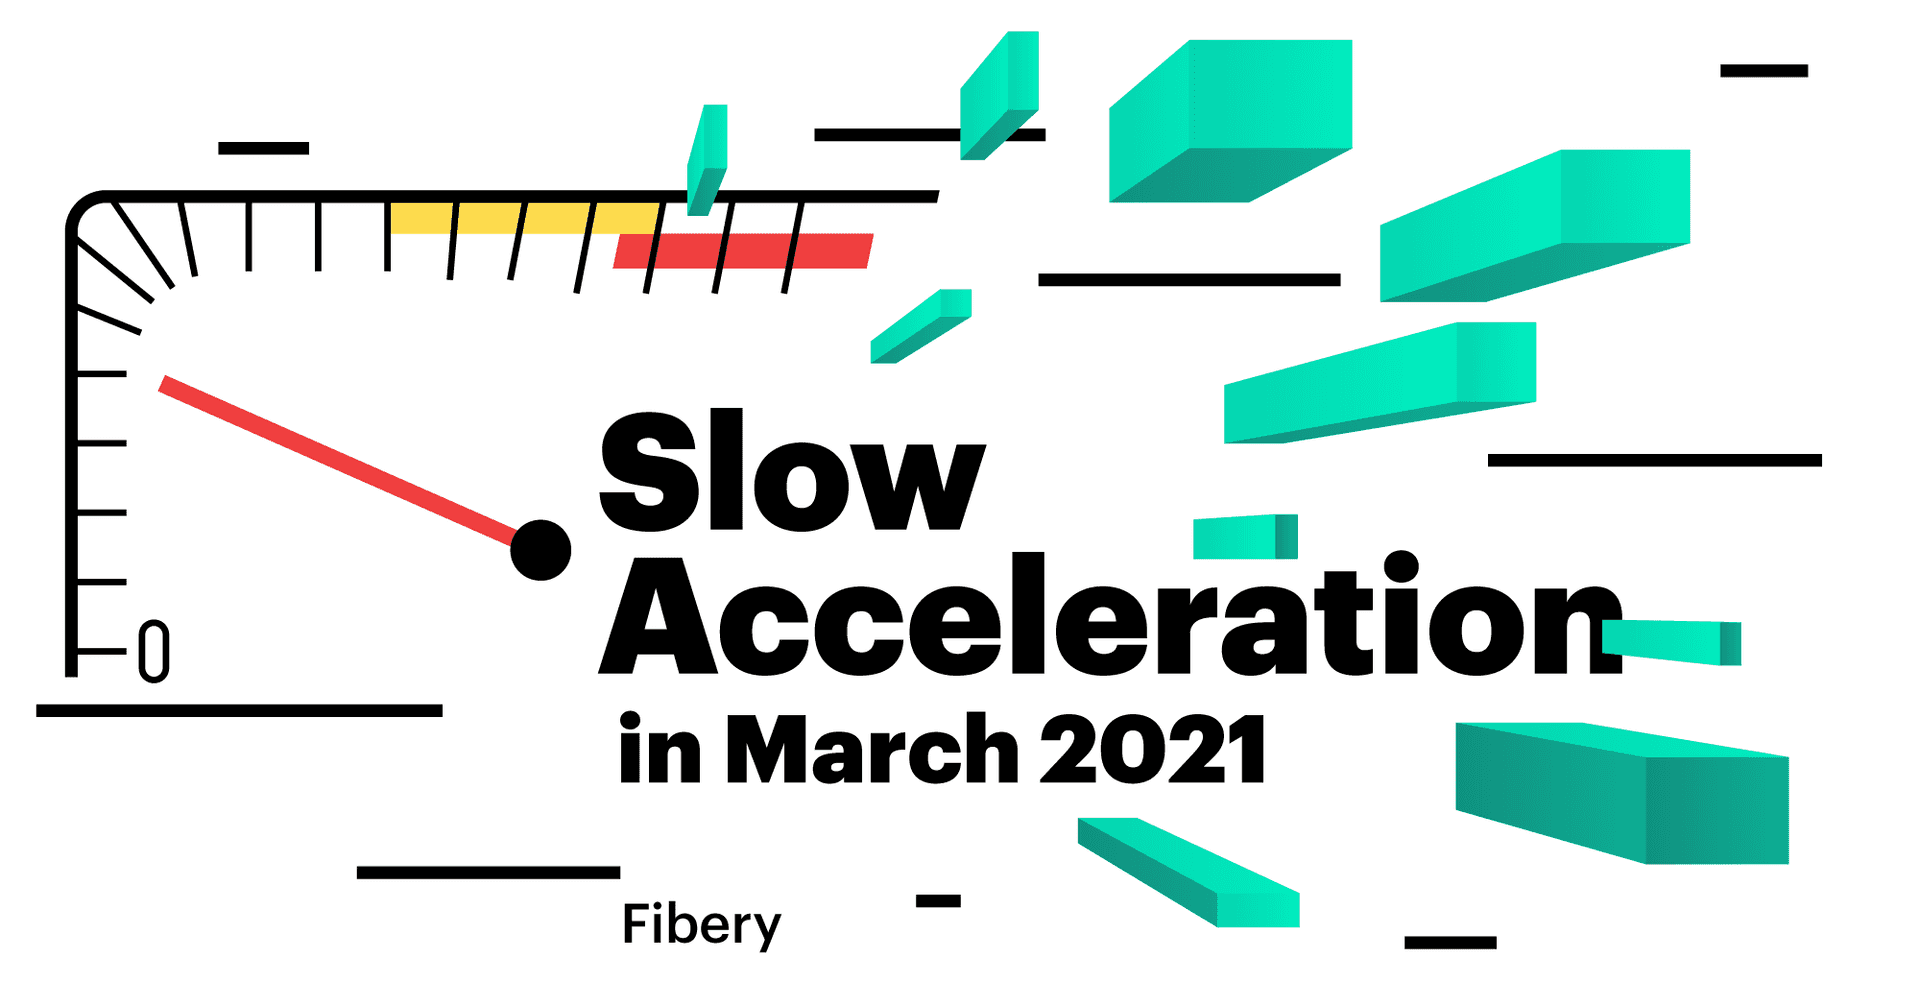 #31. Slow Acceleration in March 2021